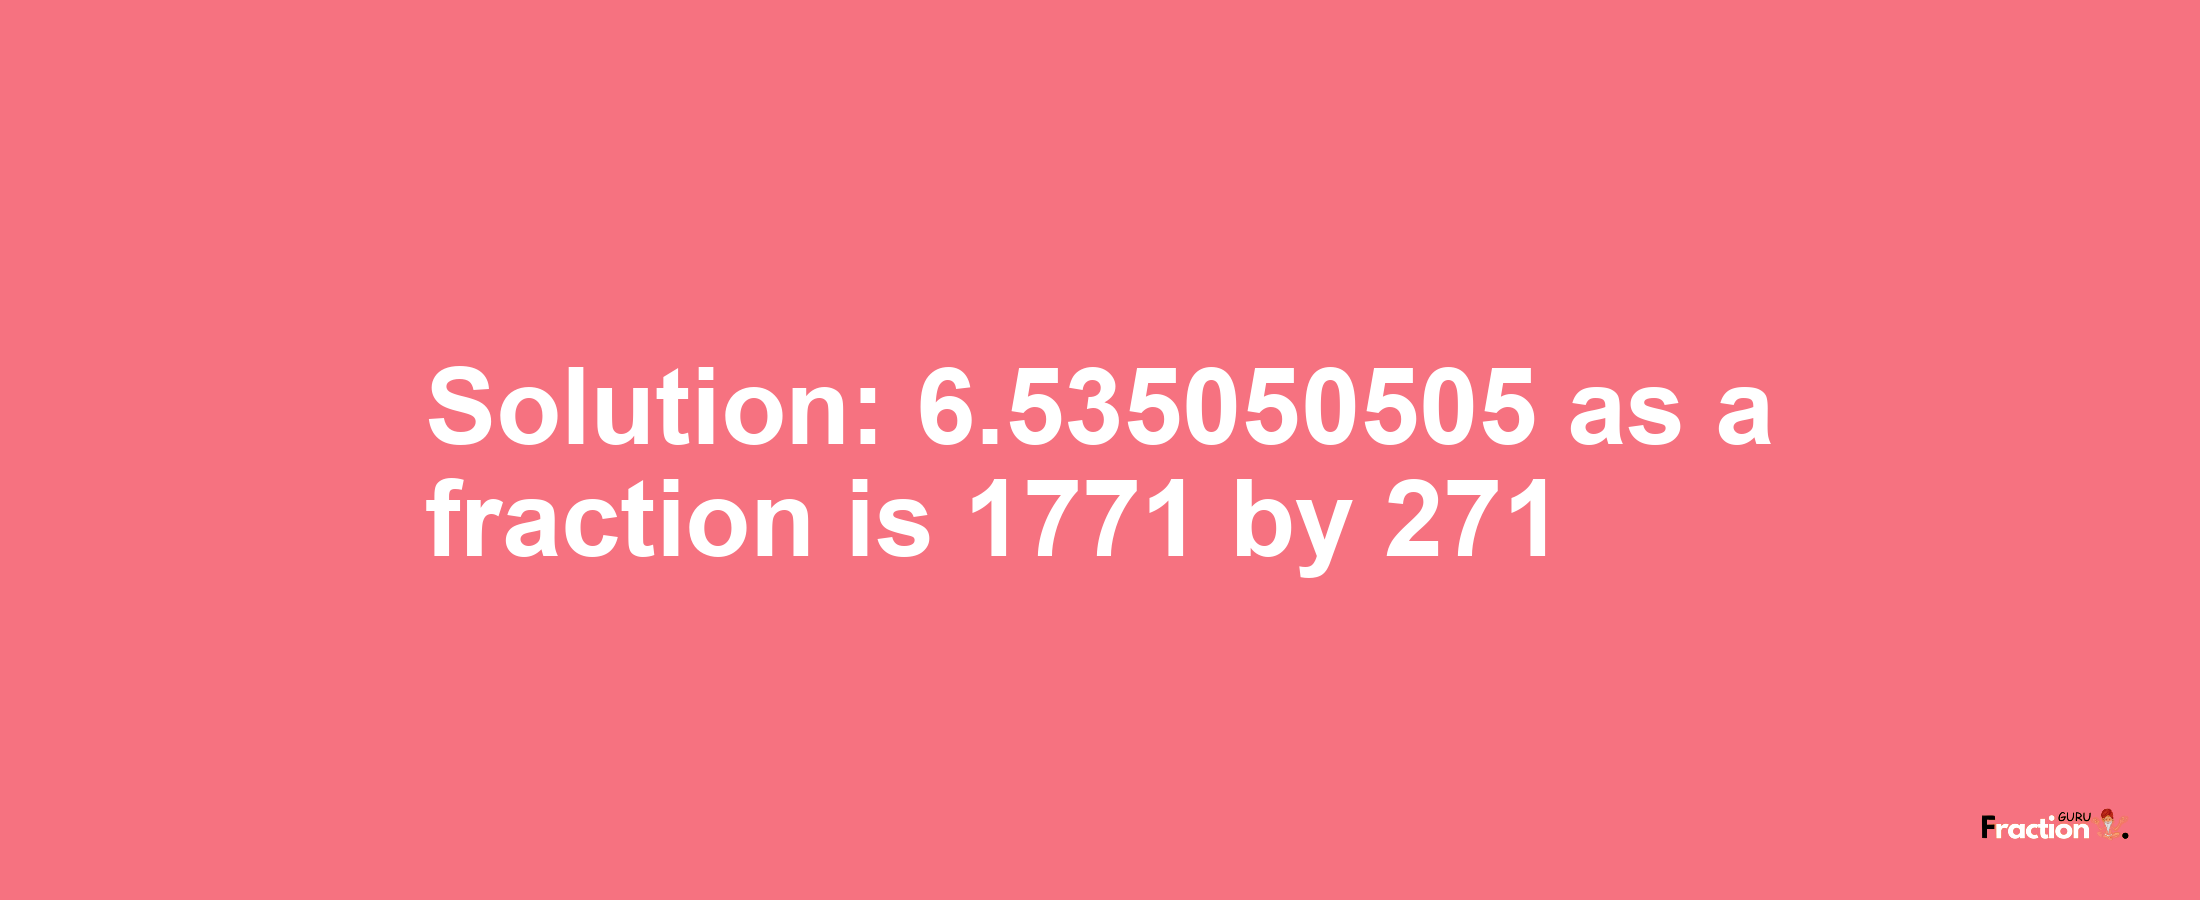 Solution:6.535050505 as a fraction is 1771/271